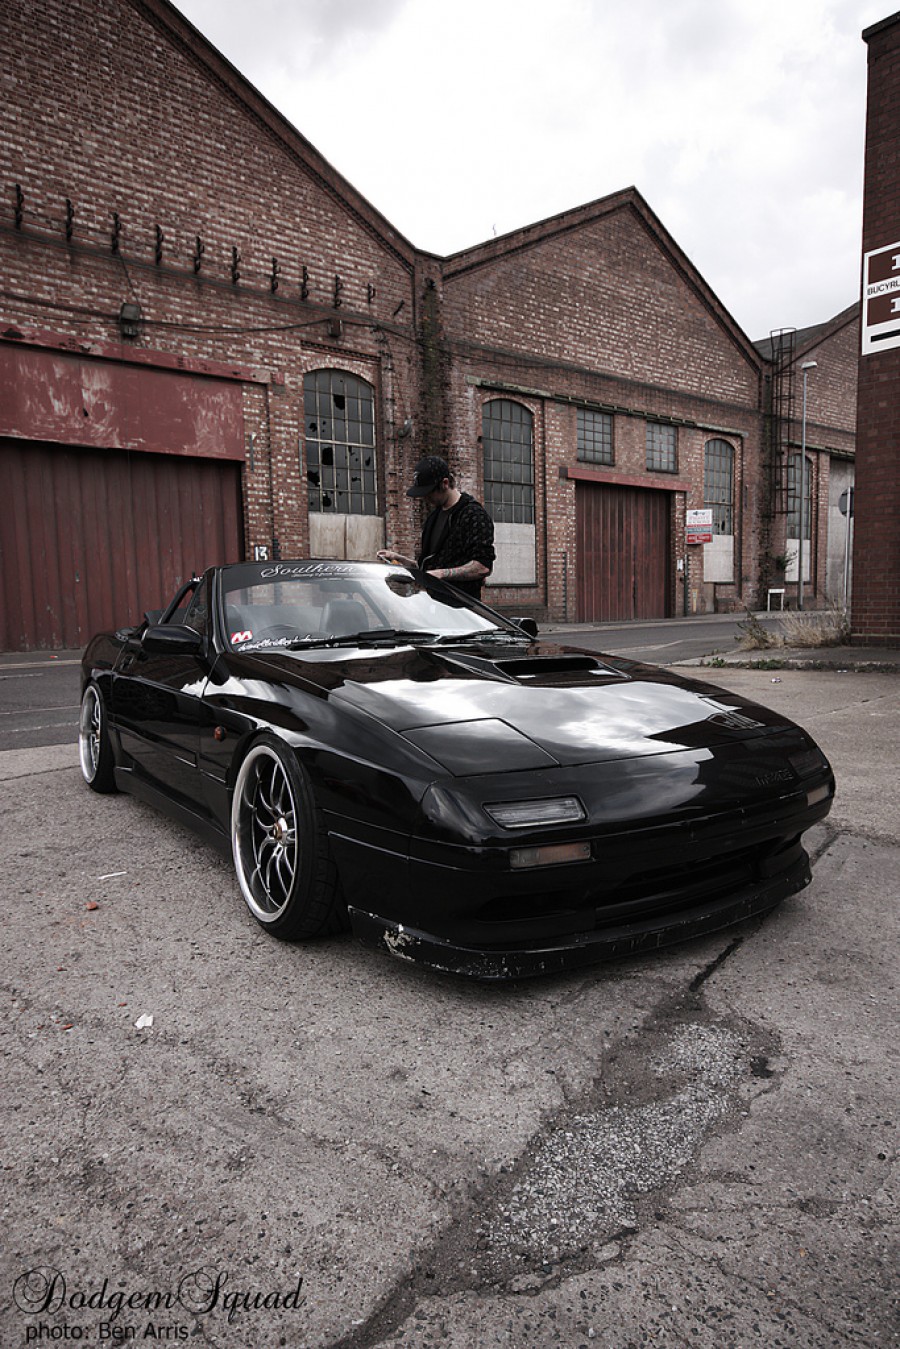 Mazda RX-7 FC rines Work Meister S2R 18″ 10J ET15 225/40 convertible 